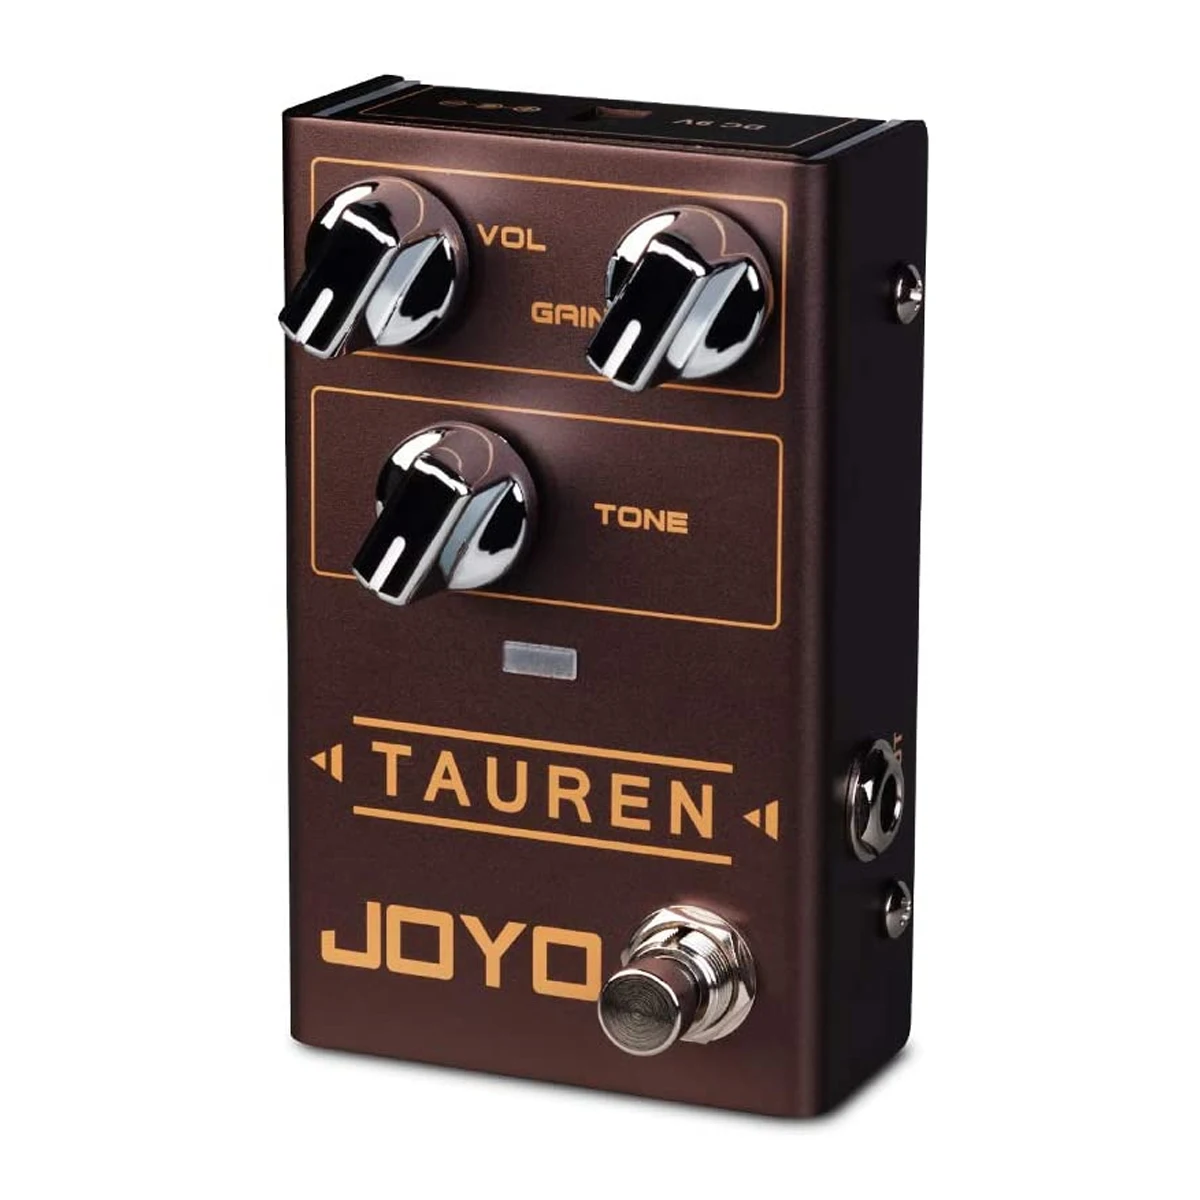 Joyo R-01 Guitar Parts Accessories Tauren Pedals Accessory Electric High Gain Pedal Effect Overload Footswitch Musical Effects enlarge